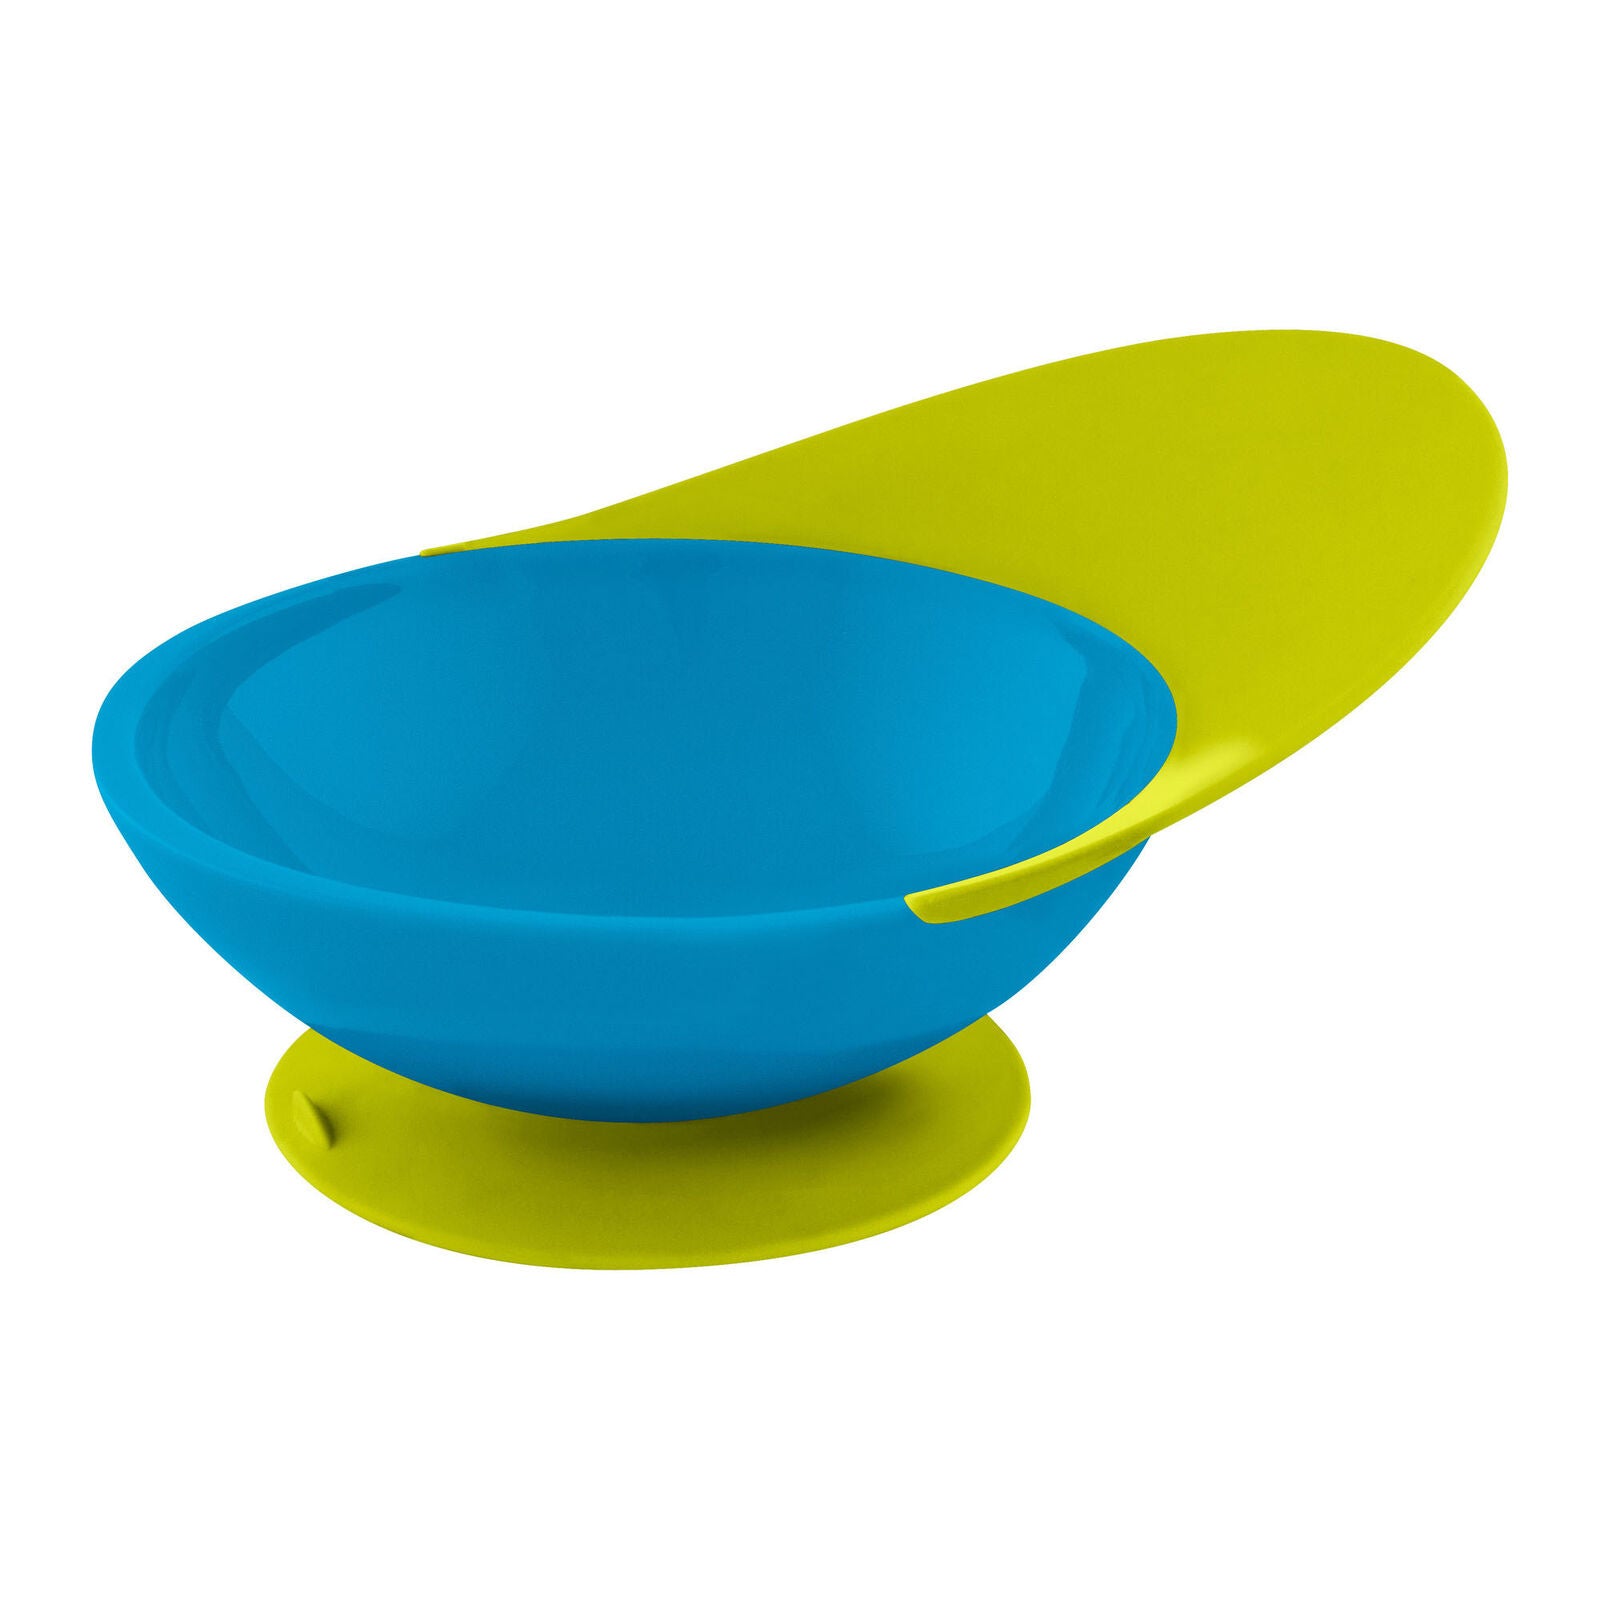 B10134 Boon CATCH Bowl Baby Feeding Blue/Green Kids Toddlers 9+ Months